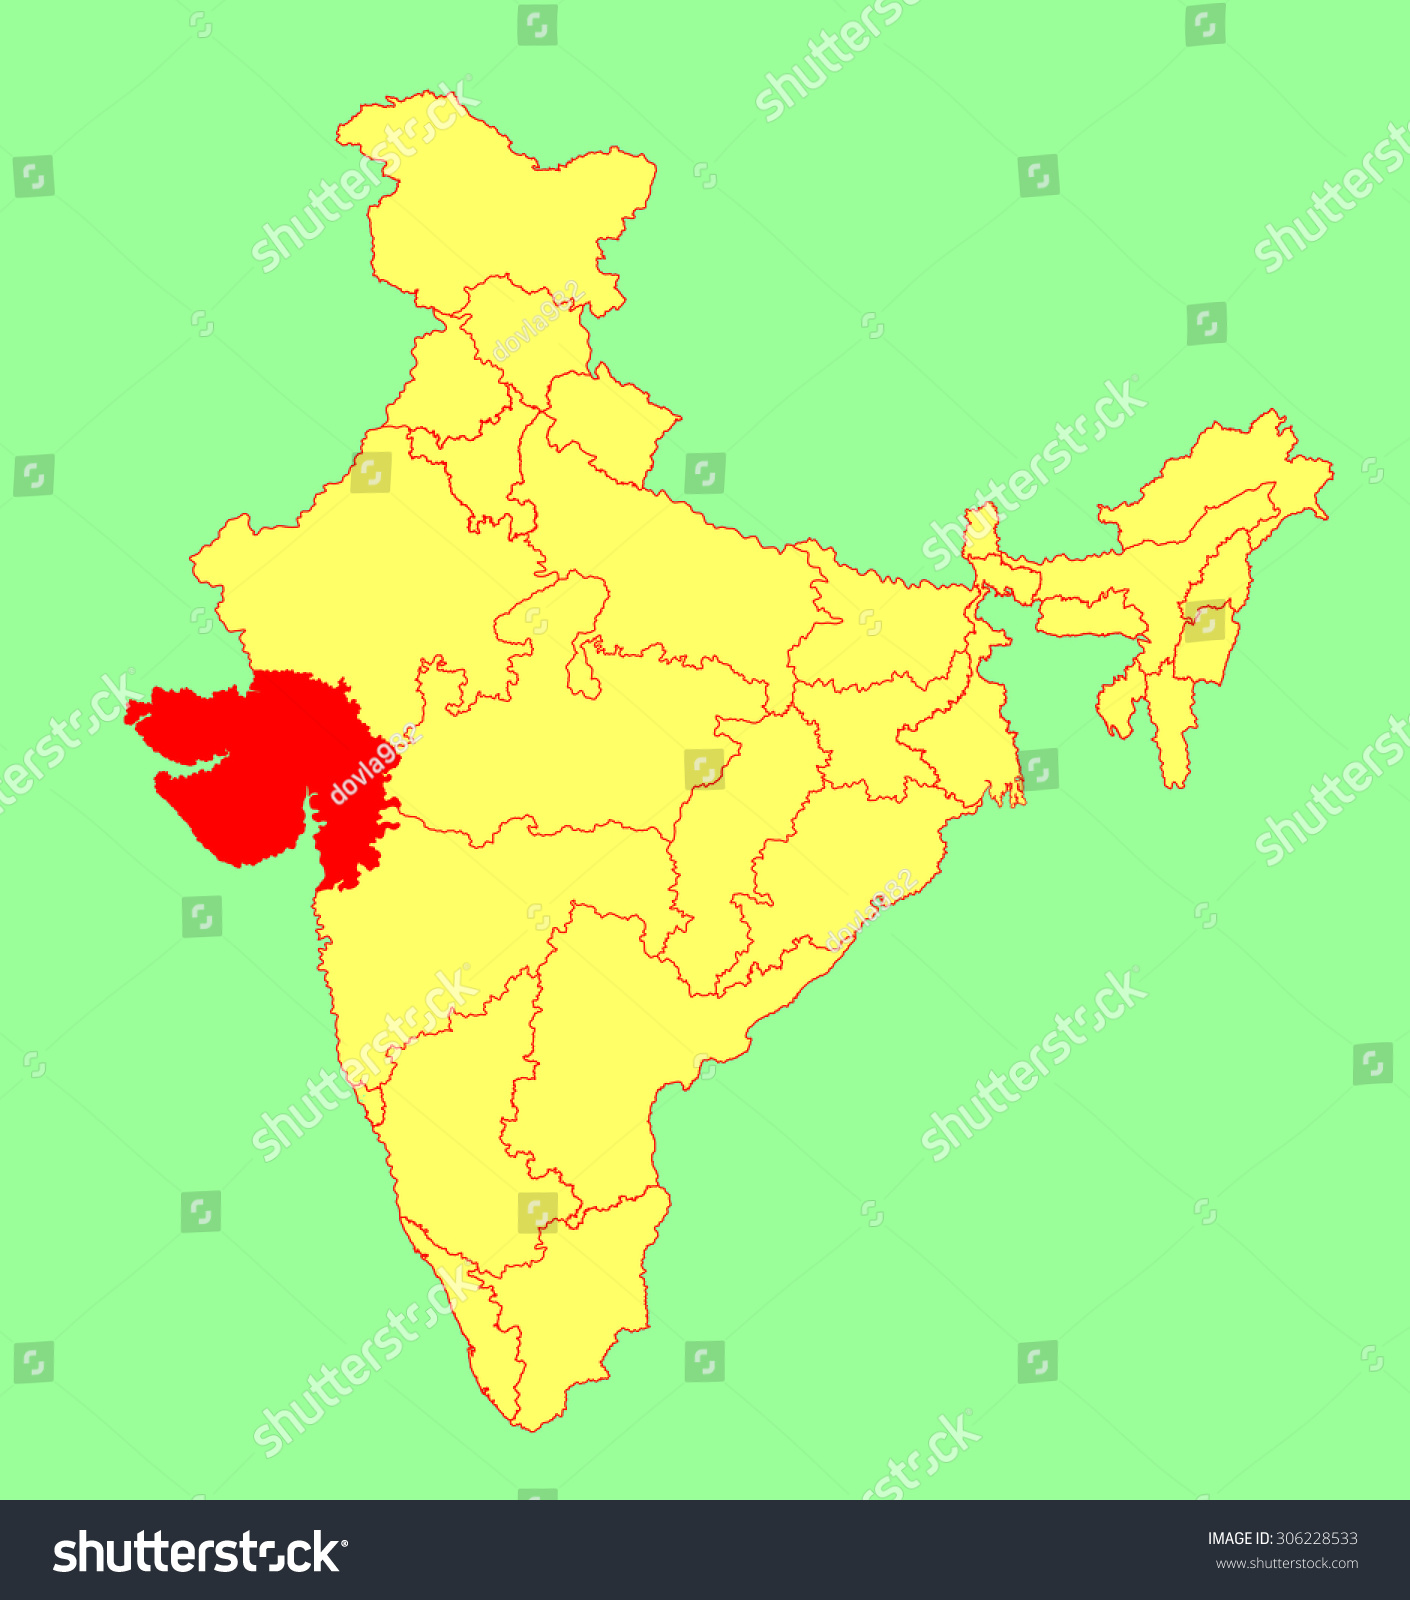 Gujrat In India Map Gujarat State India Vector Map Silhouette Stock Vector (Royalty Free)  306228533 | Shutterstock